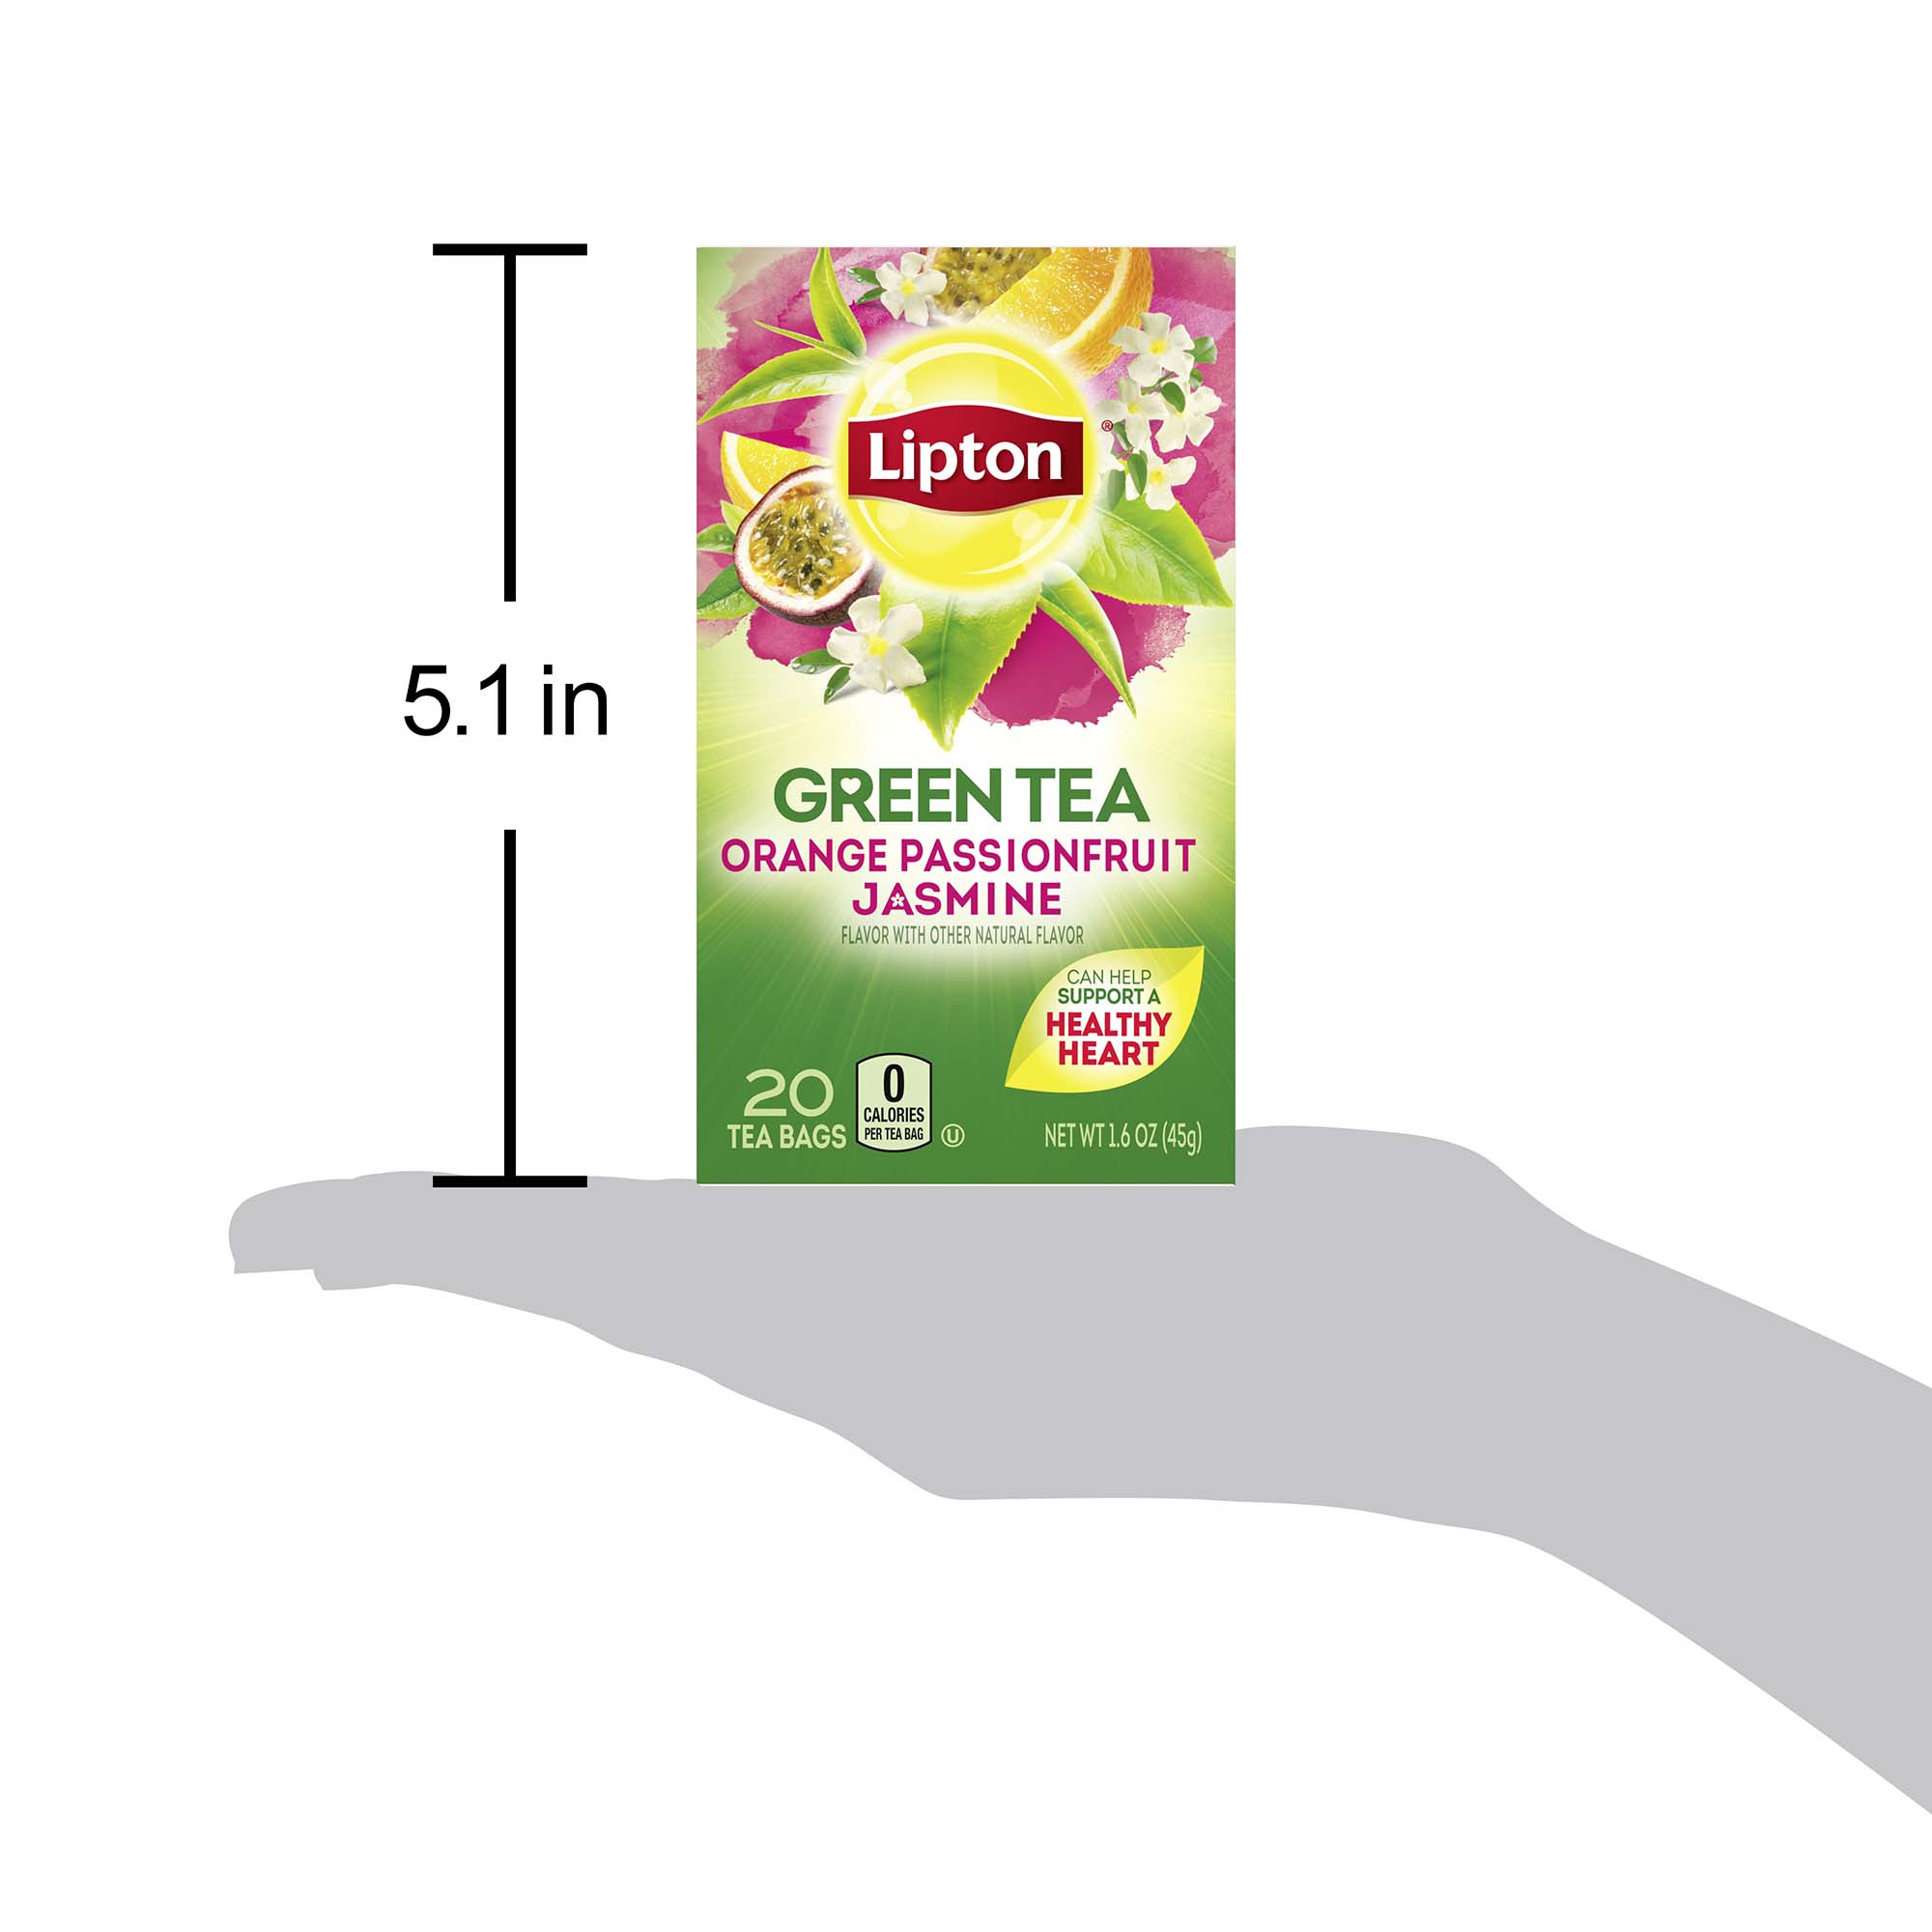 Lipton Green Tea Bags Orange Passionfruit Jasmine Flavored with Other Natural Flavors Can Help Support a Healthy Heart 1.13 oz 20 Count - image 4 of 9